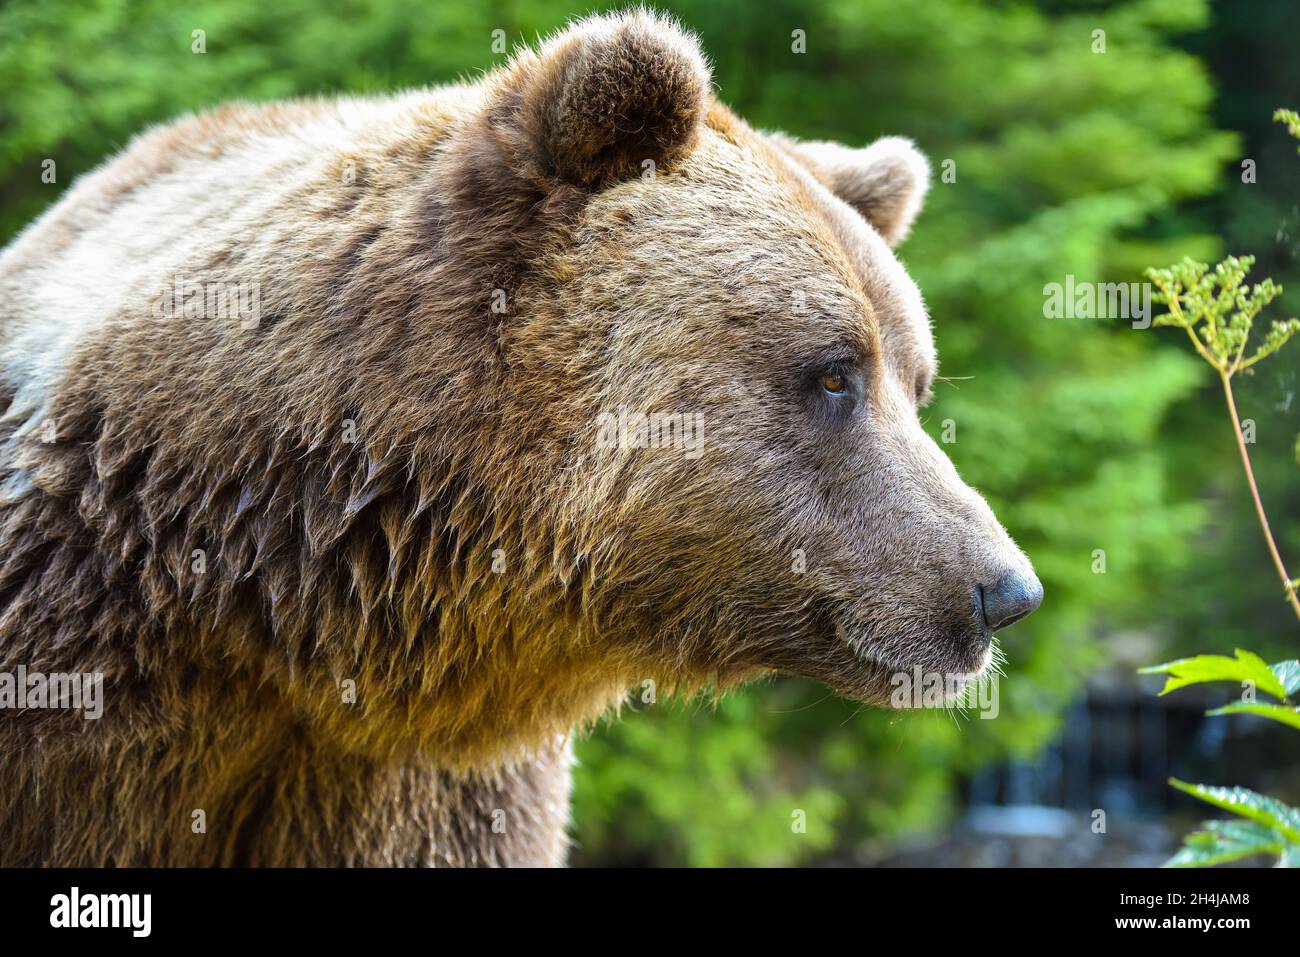 Brown bear portrait. Side view of bear face. Stock Photo